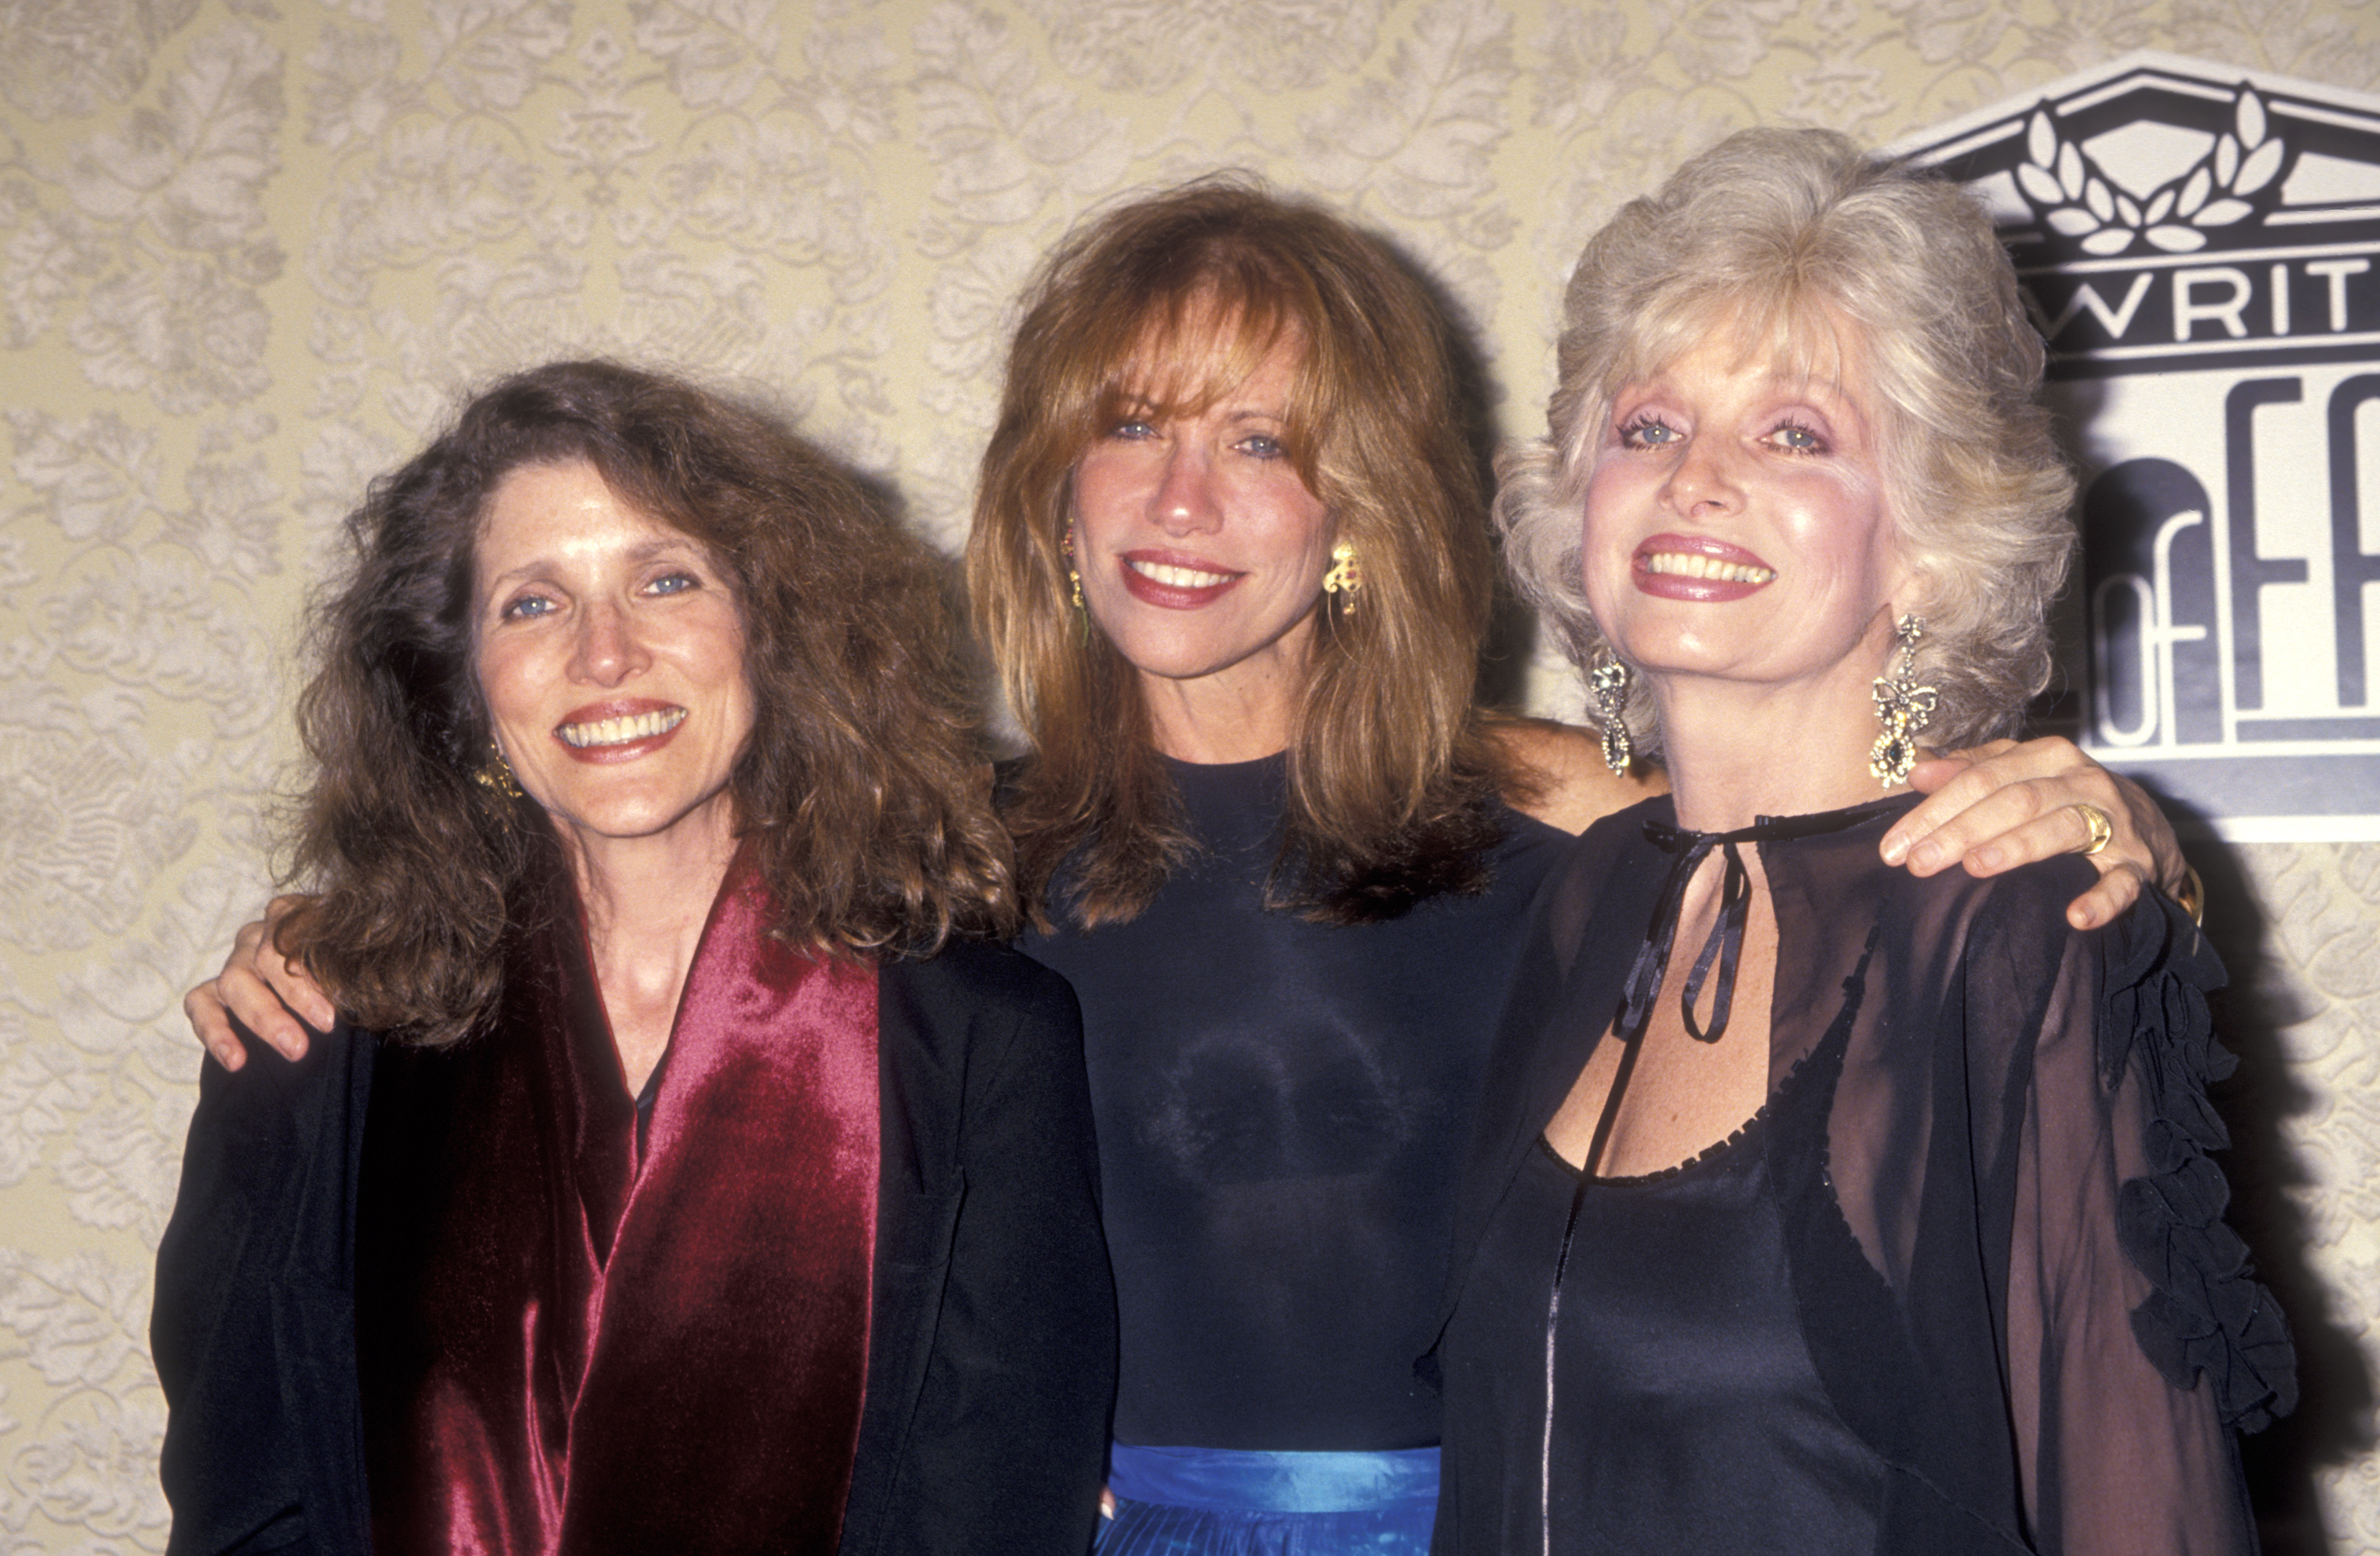 NEW YORK CITY - JUNE 1:  Musician Carly Simon and sisters Lucy Simon and Joanna Simon attend The National Academy of Popular Music's 25th Annual Songwriters Hall of Fame Induction Ceremony on June 1, 1994 at Sheraton New York Hotel and Towers in New York City, New York. (Photo by Ron Galella, Ltd./Ron Galella Collection via Getty Images)